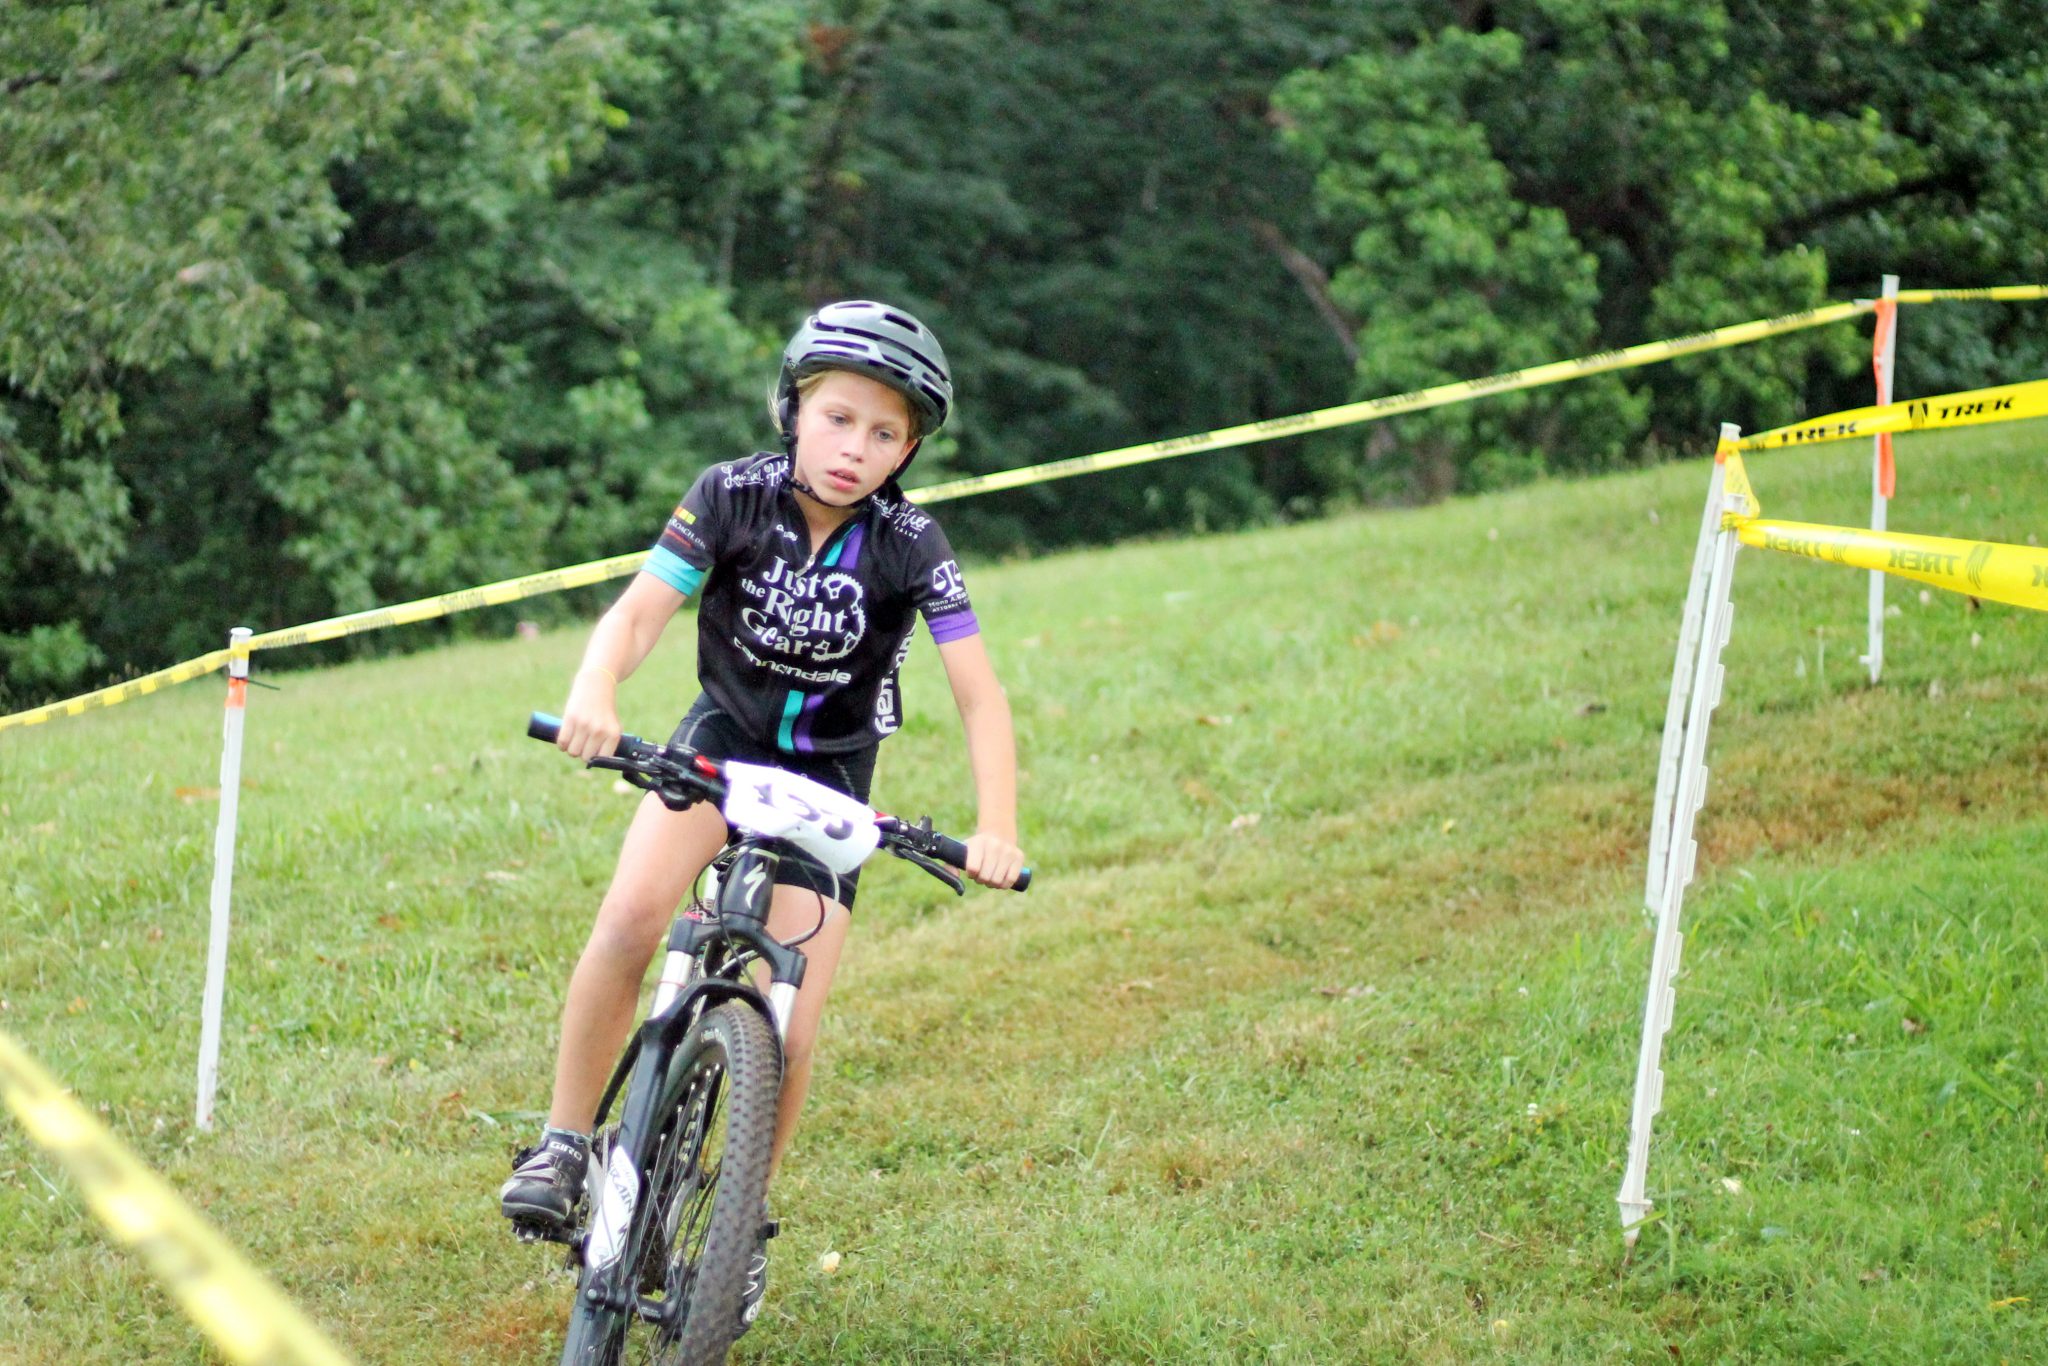 Fishburn youth mountain biker rides out of a turn at the Play Roanoke race event